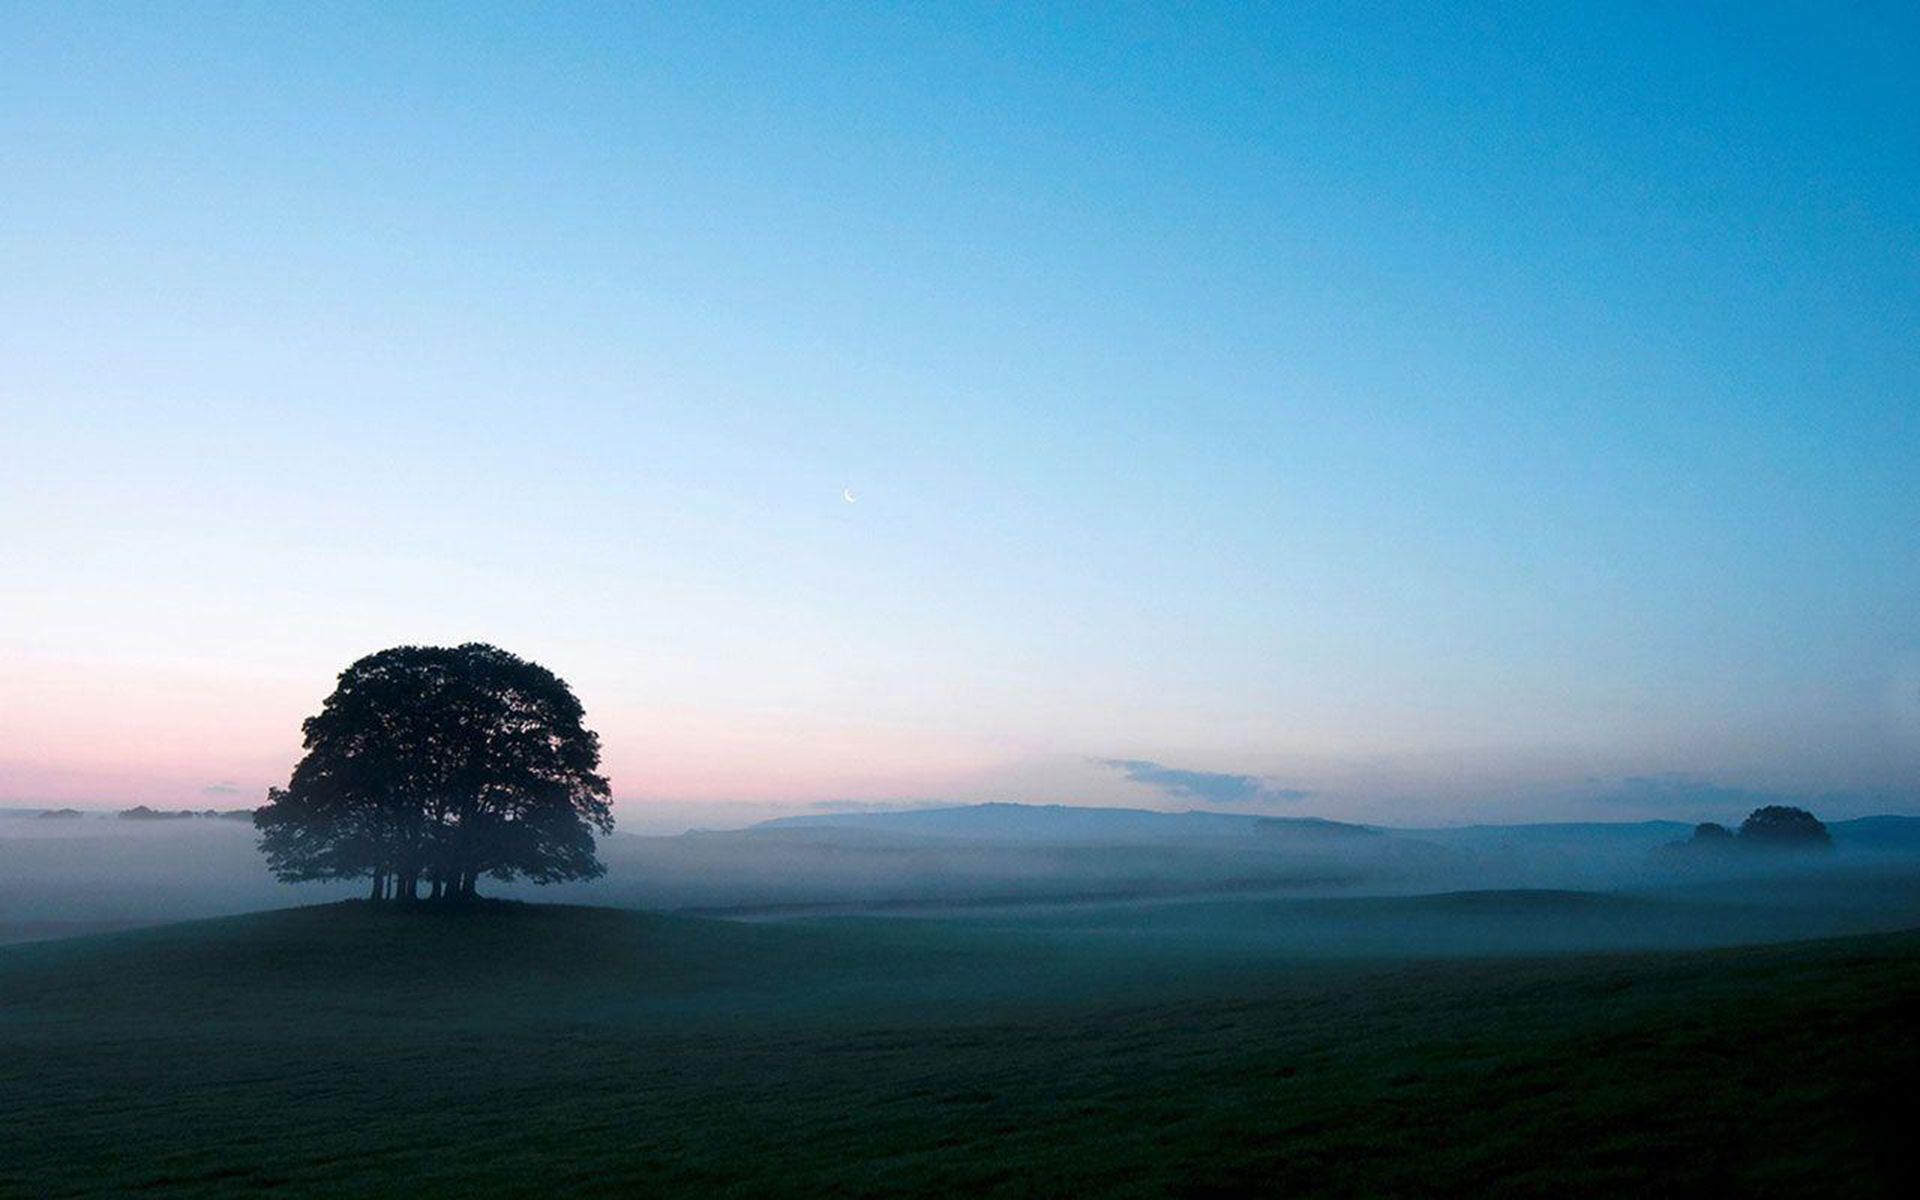 A lone tree in a field with a misty blue sky - Landscape, scenery, nature